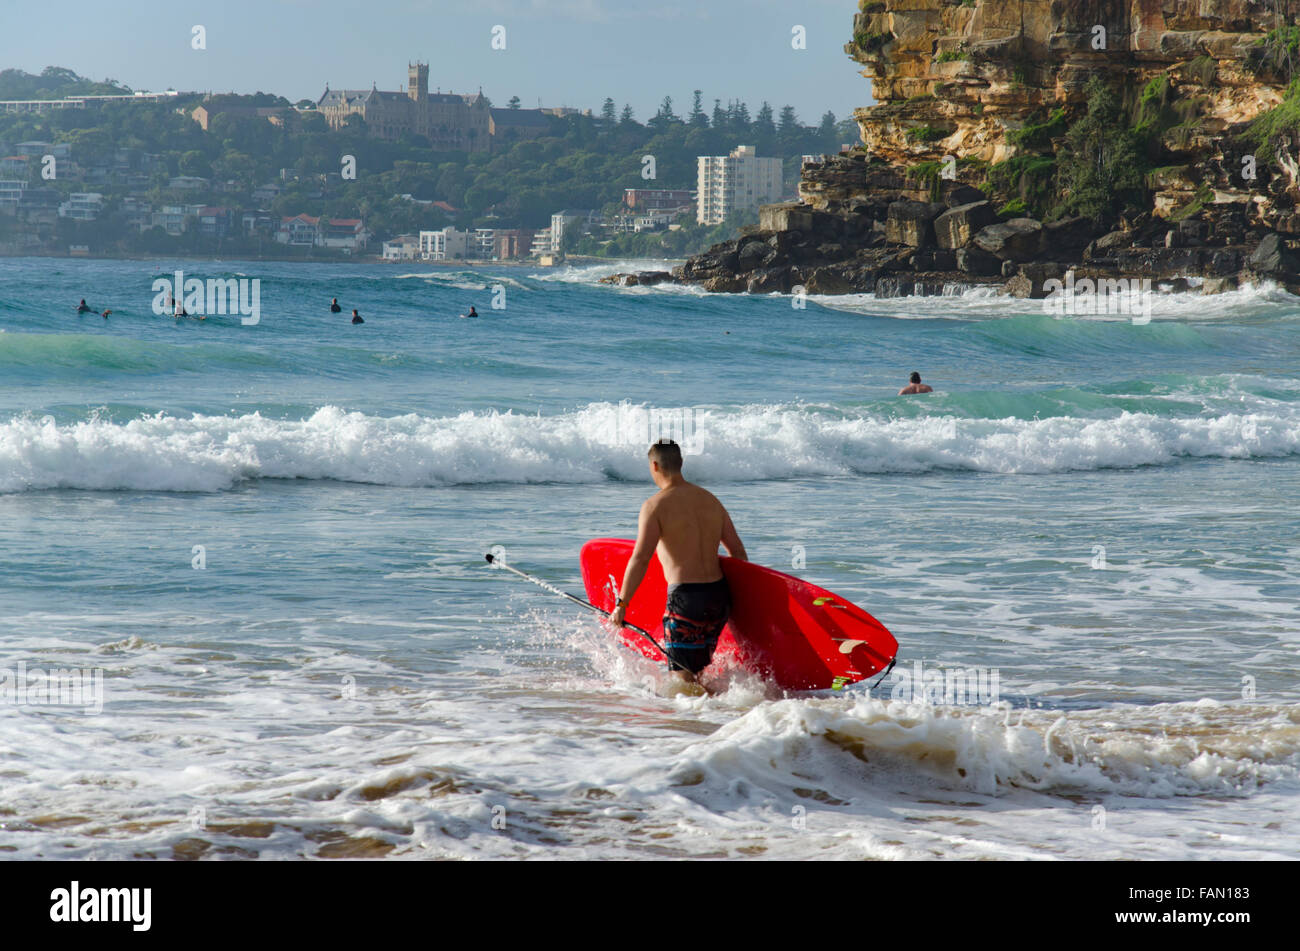 A man carrying a red standup paddleboard (SUP) enters the surf at Freshwater Beach on a sunny Sydney morning in Australia Stock Photo